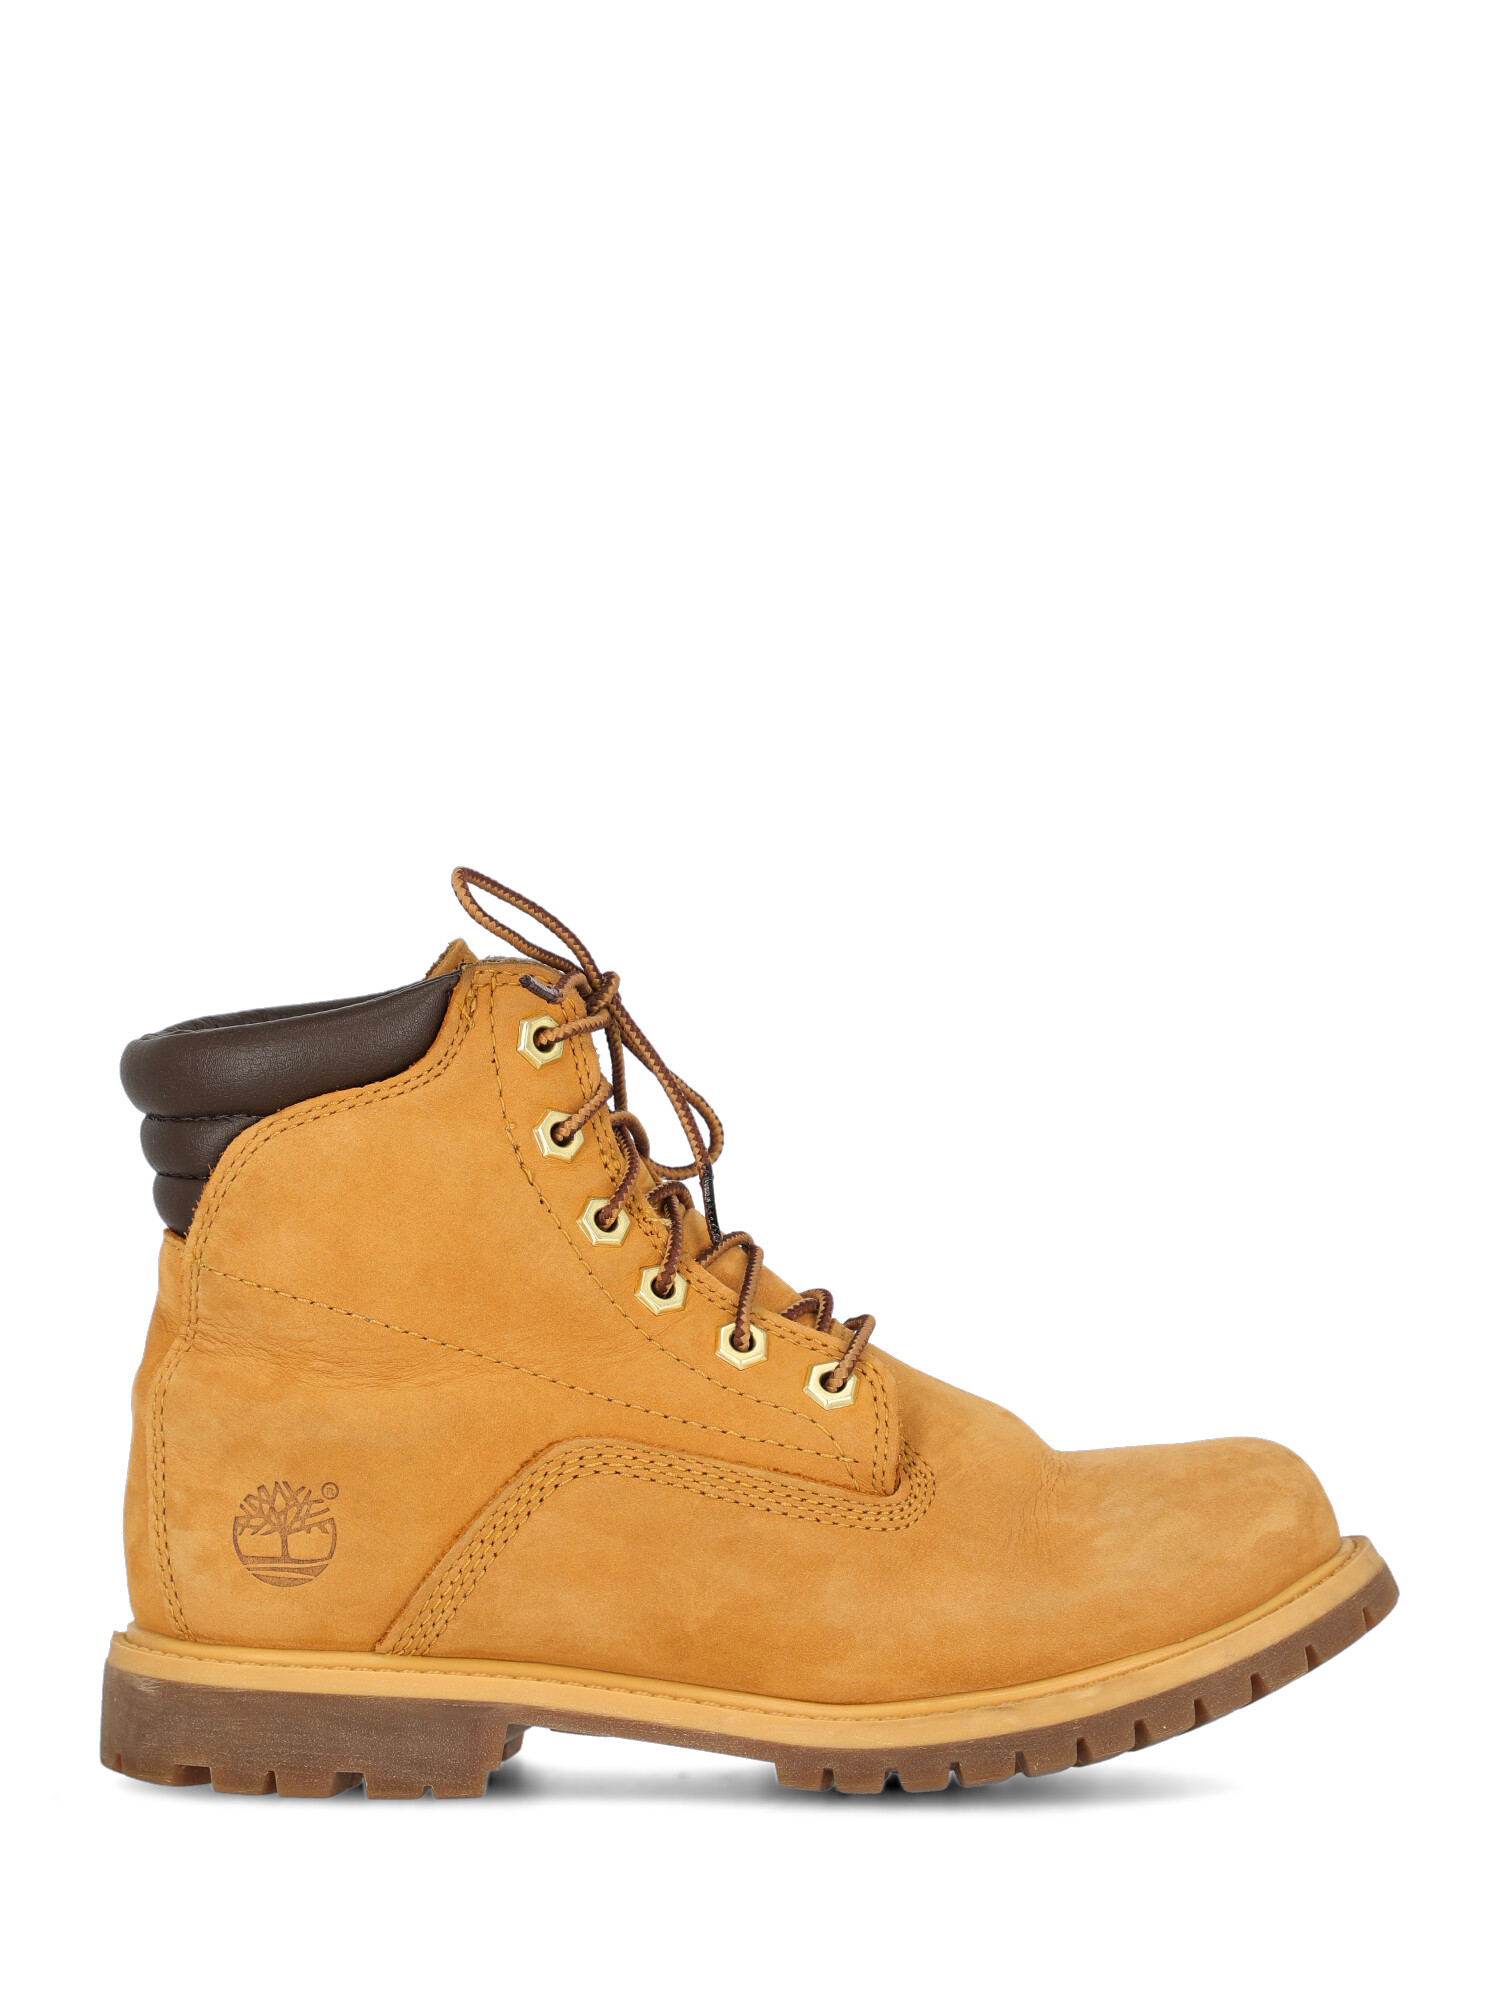 Pre-owned Timberland Shoe In Camel Color